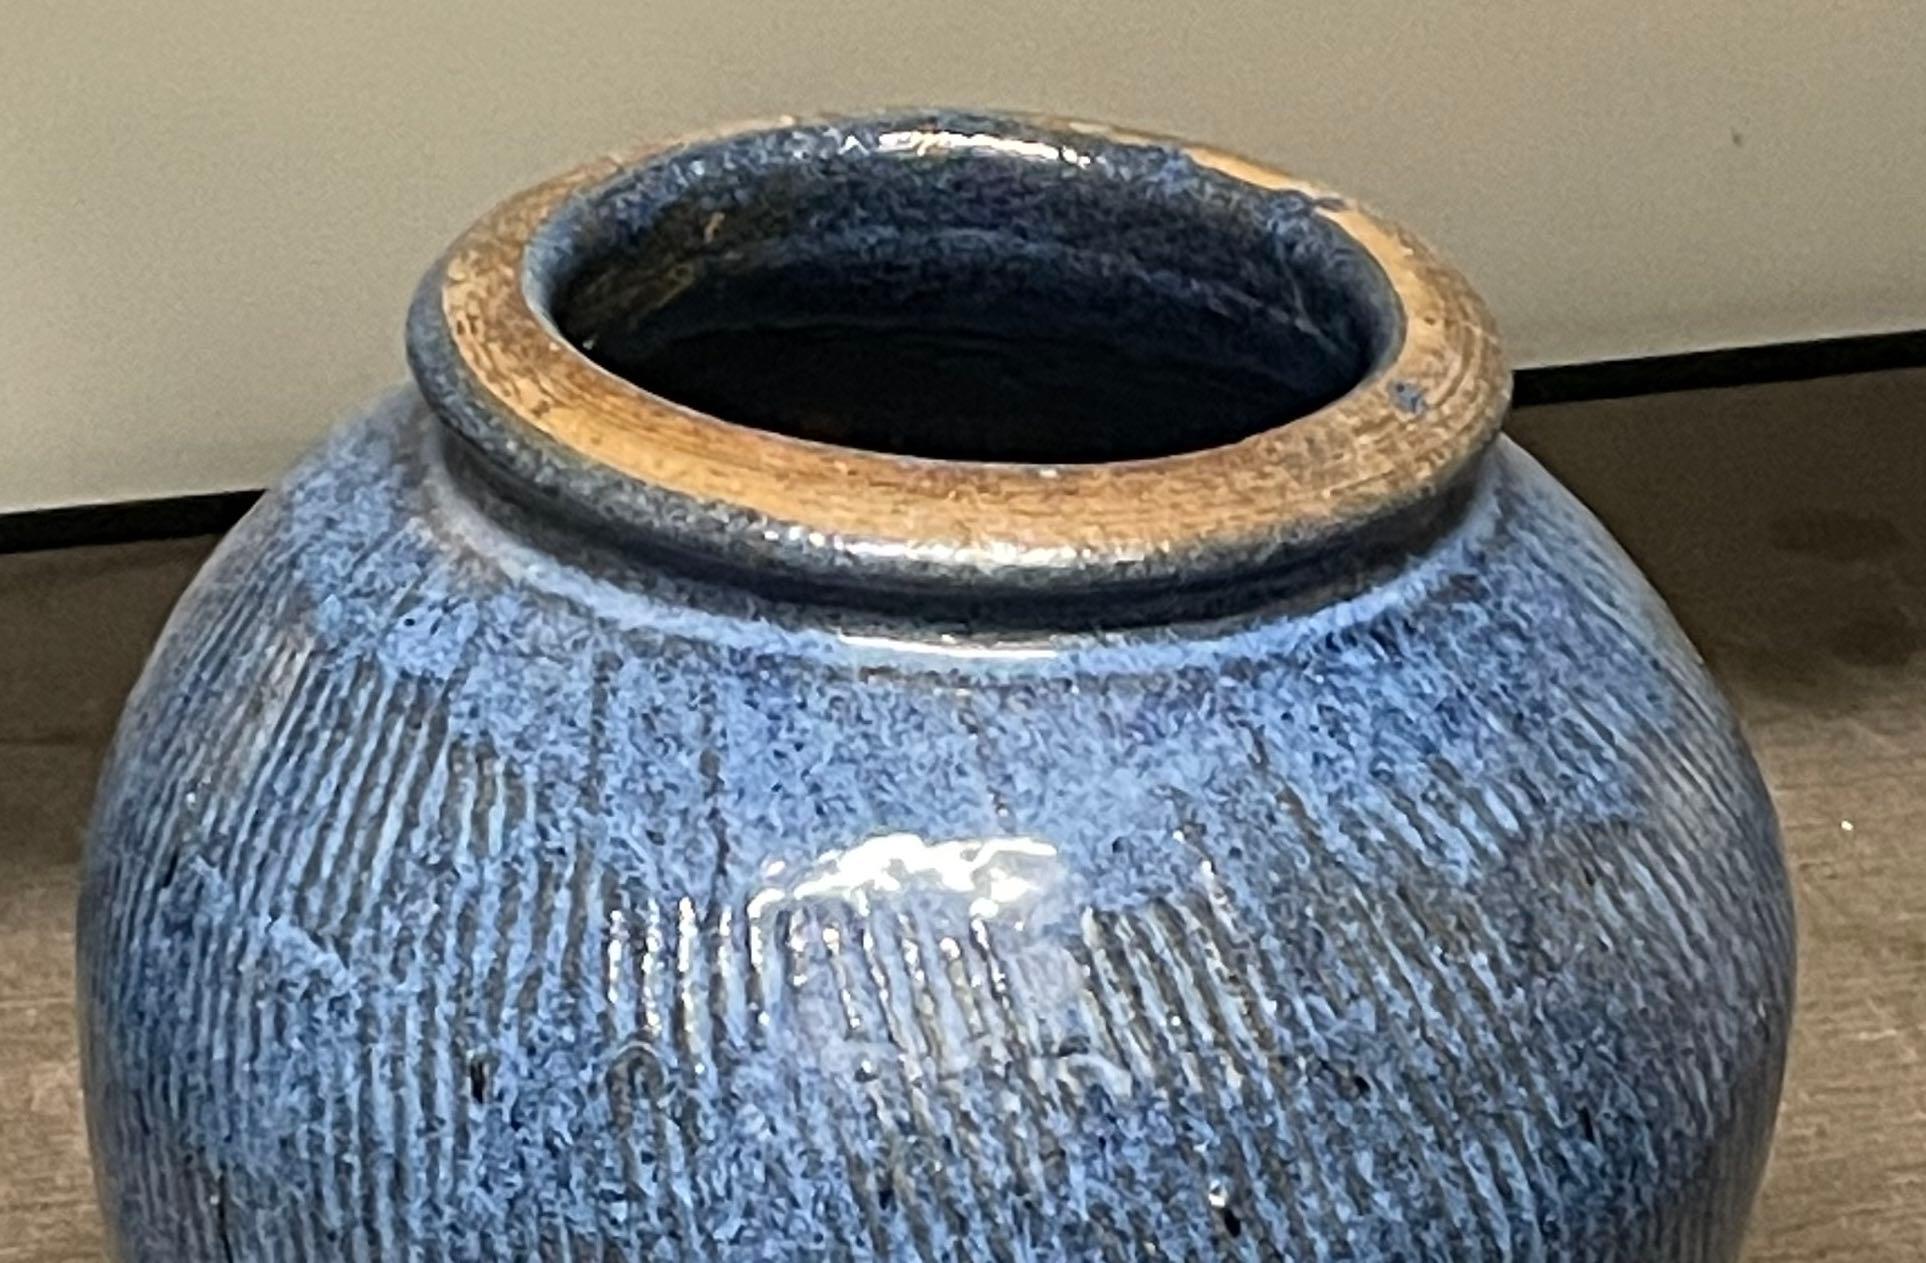 Contemporary Chinese vase with deep blue glaze and vertical stripe detail.
Two available and sold individually.